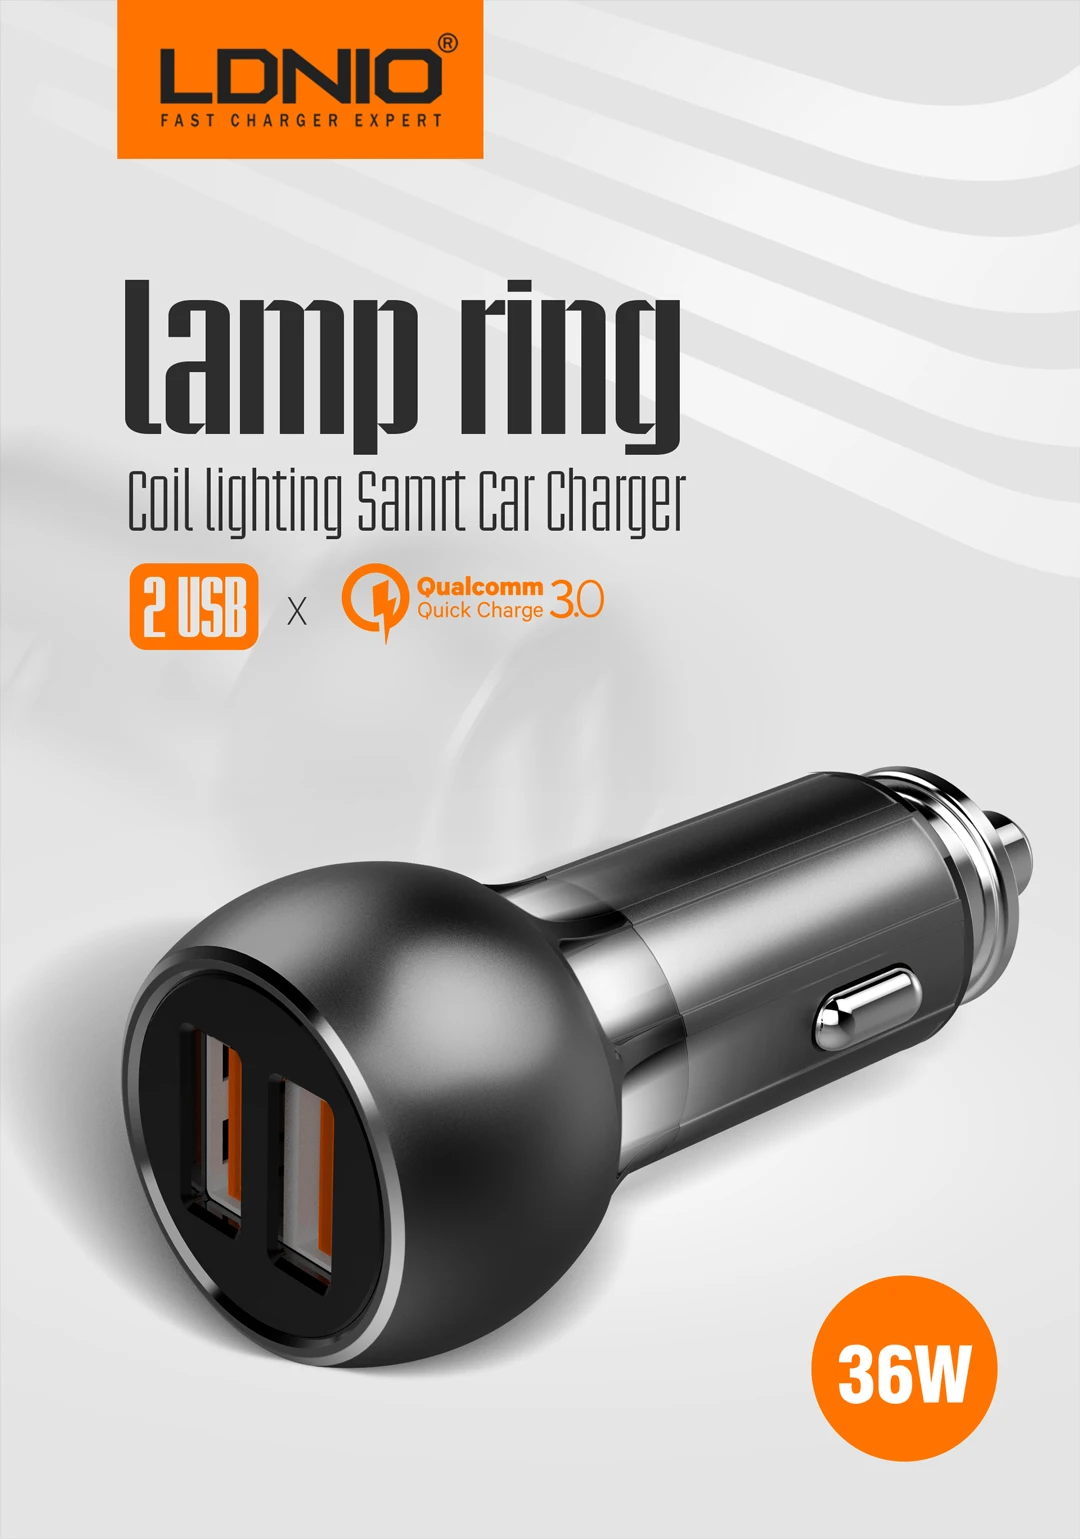 LDNIO New Metal Charger with 2 USB Port QC3.0 and Coil Lighting Smart Car Charger C503Q